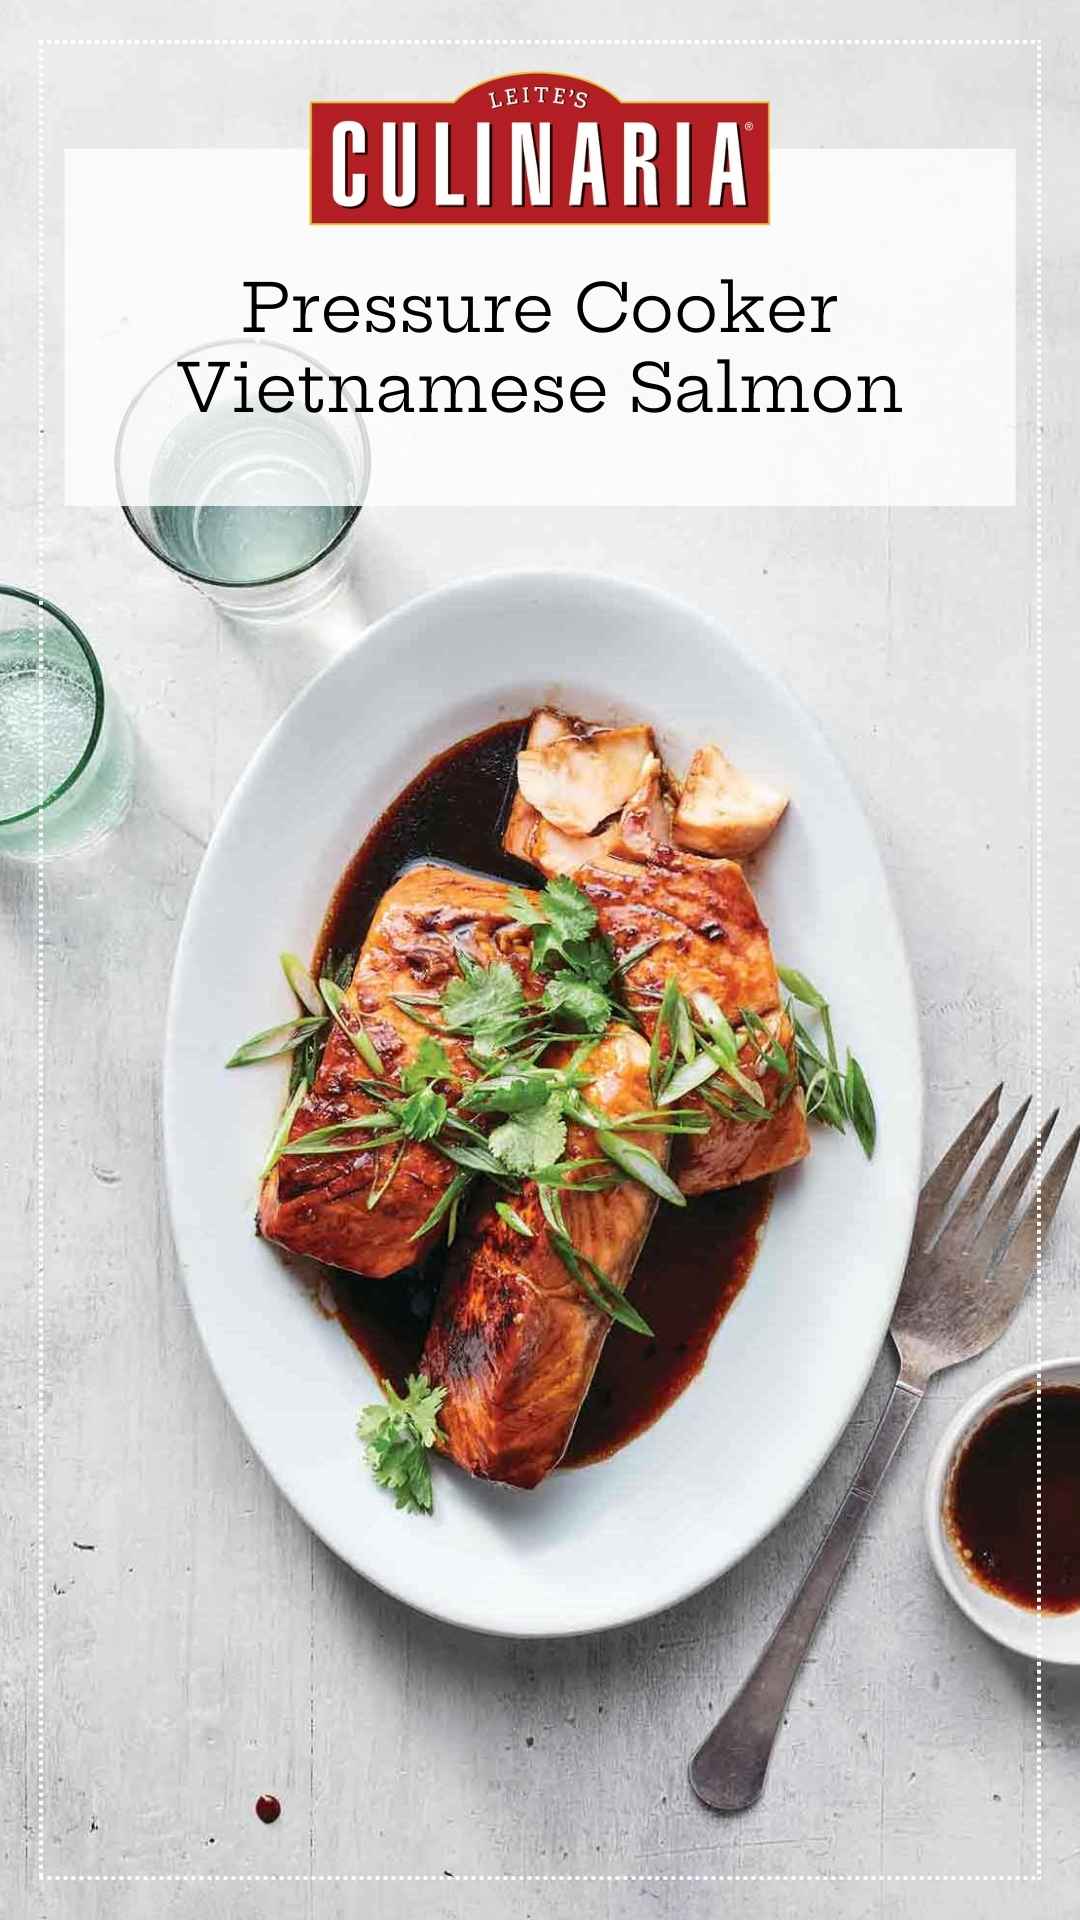 Three salmon filets on an oval platter in a soy caramel sauce, topped with cilantro and scallions.